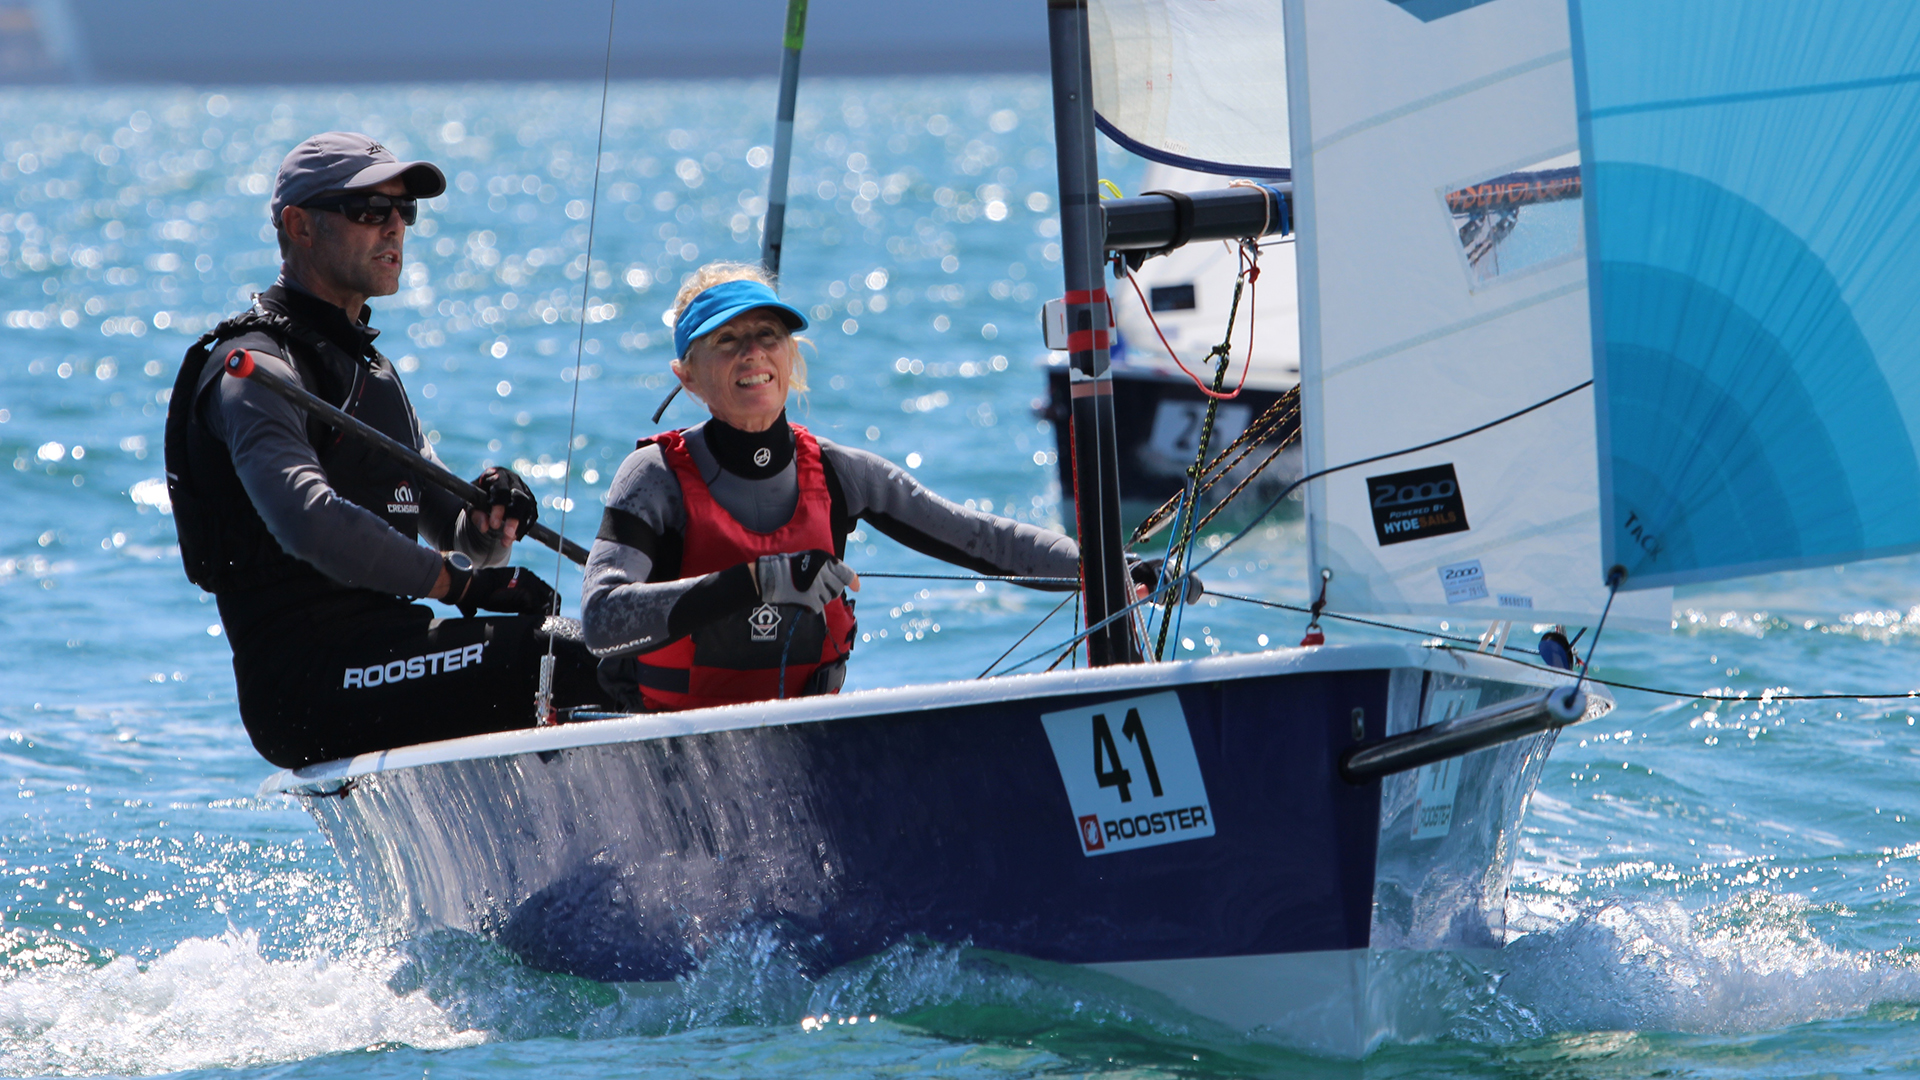 Two adults sailing a Laser 2000 dinghy with blue spinnaker sail at Mylor Sailing School near Falmouth, Cornwall